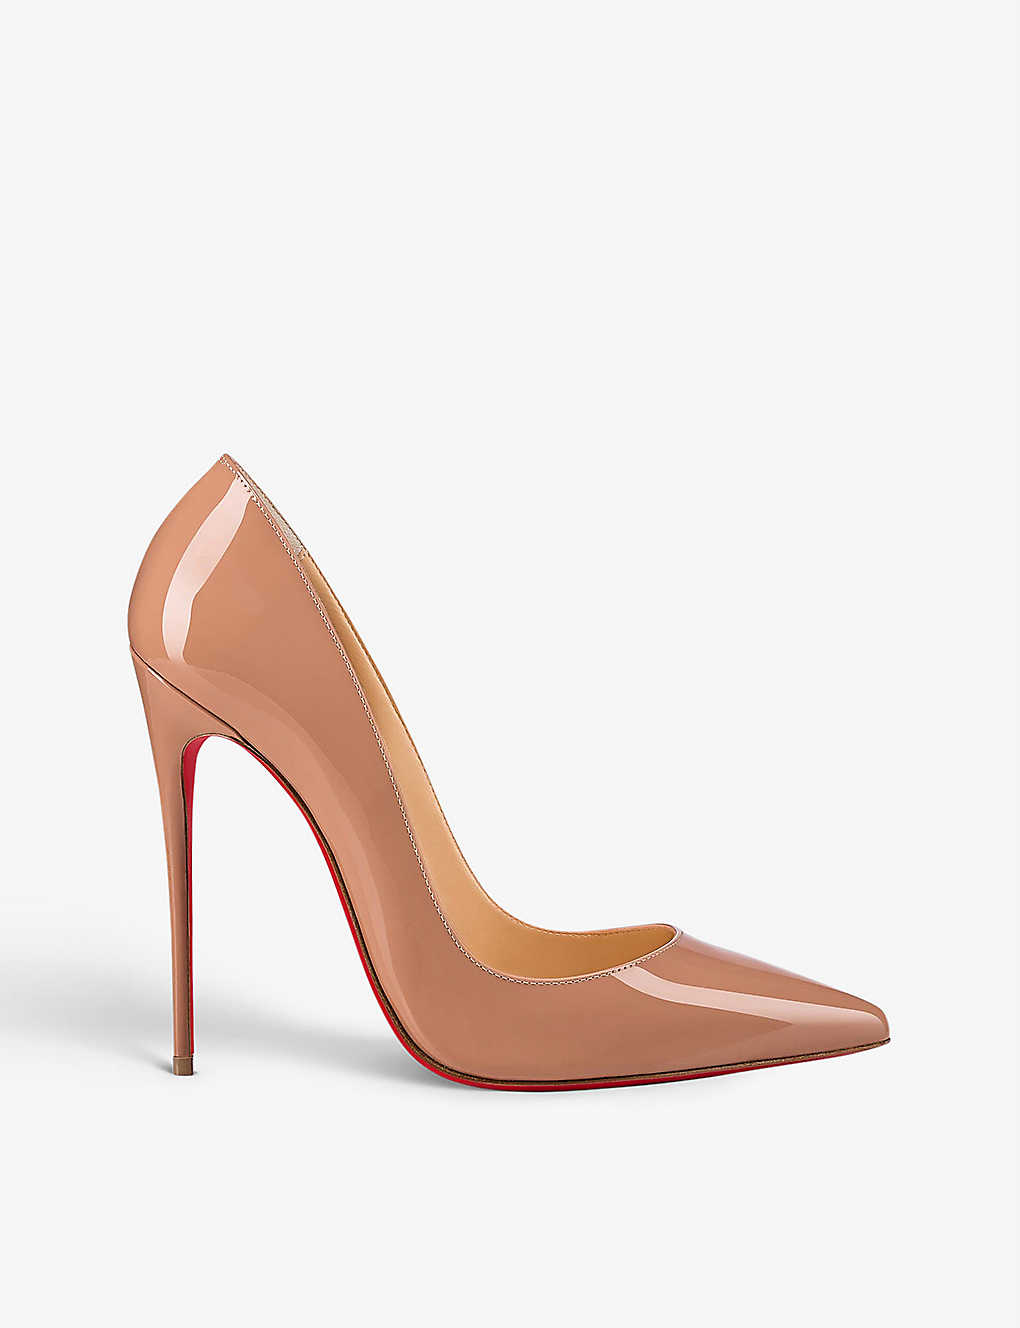 Shop Christian Louboutin Womens Nude So Kate 120 Patent-leather Courts